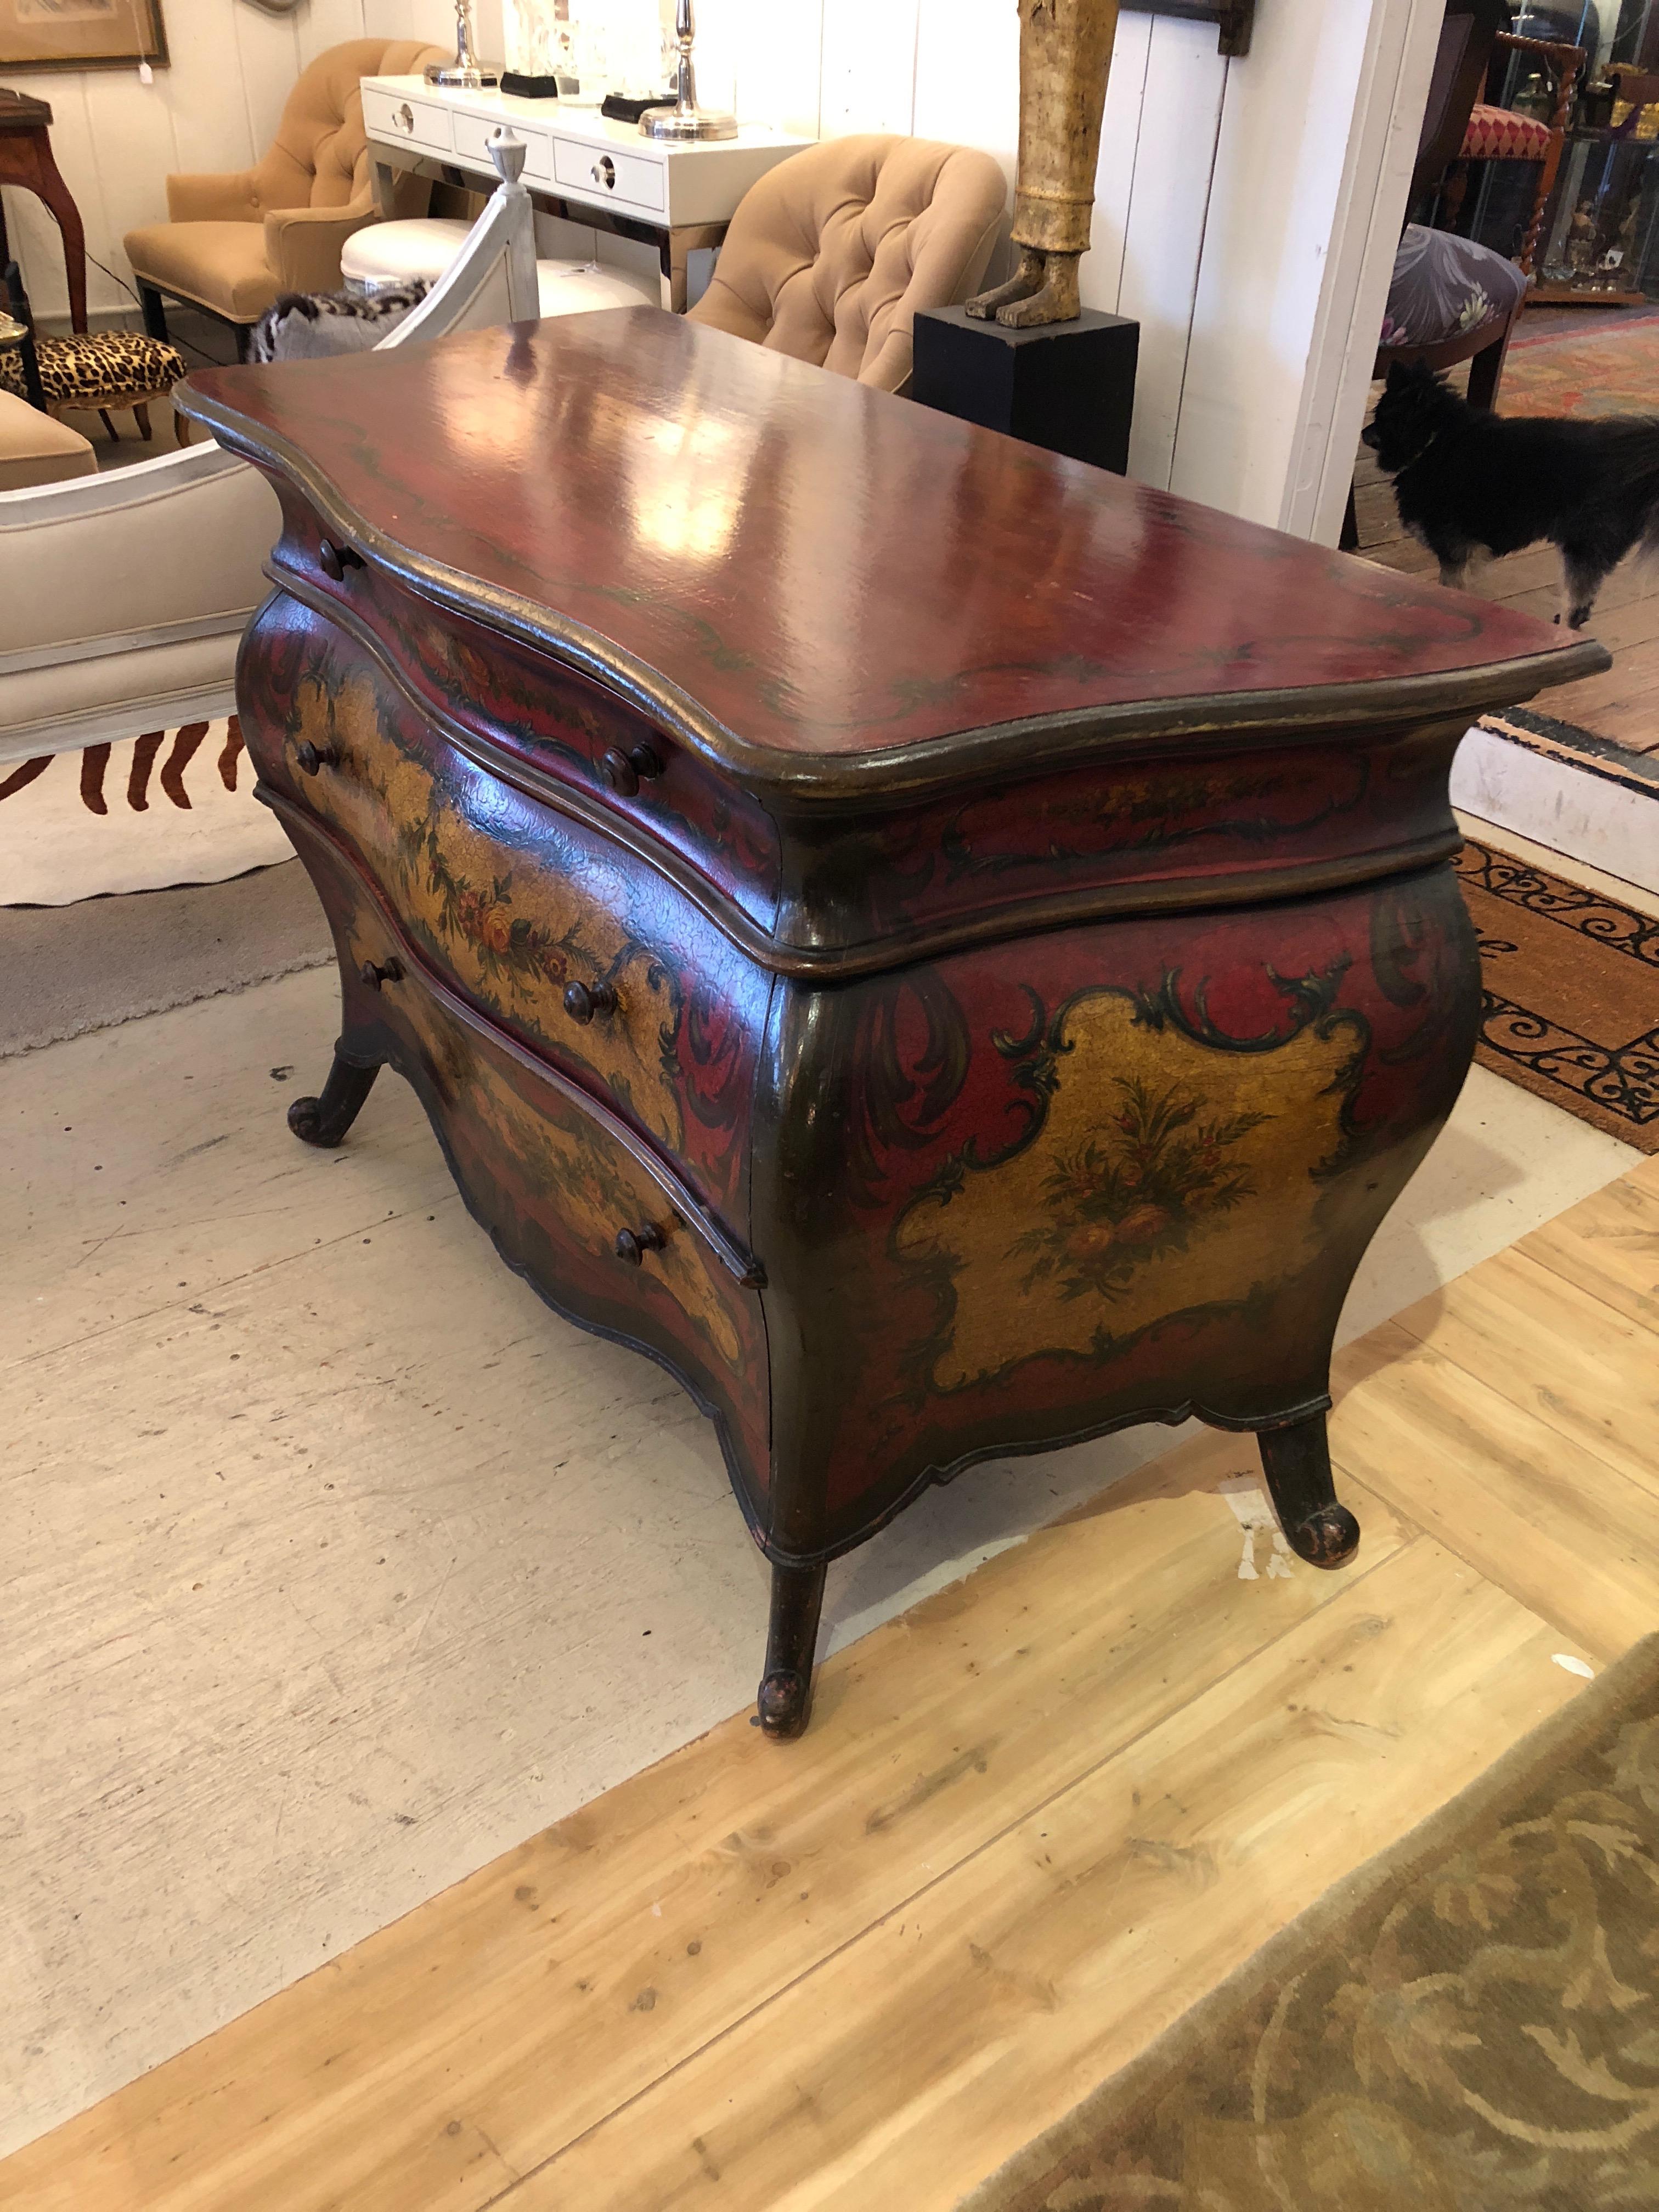 A richly painted barn red antique bombay commode having wonderful foliage decoration, cream background on the three drawers, original turned wood knobs and sassy splayed feet.
Drawers work smoothly.